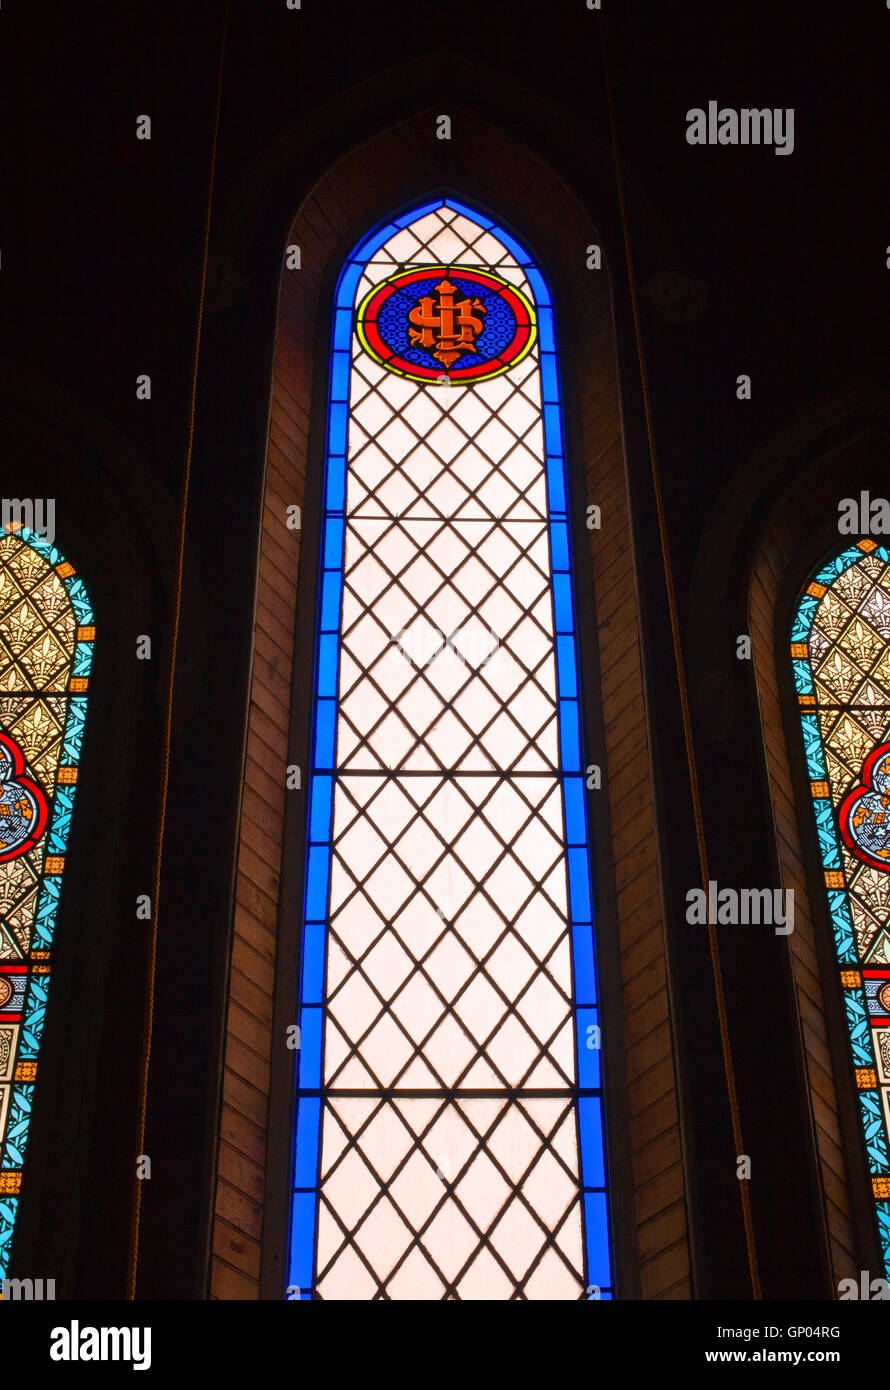 Stained glass window inside church. Stock Photo